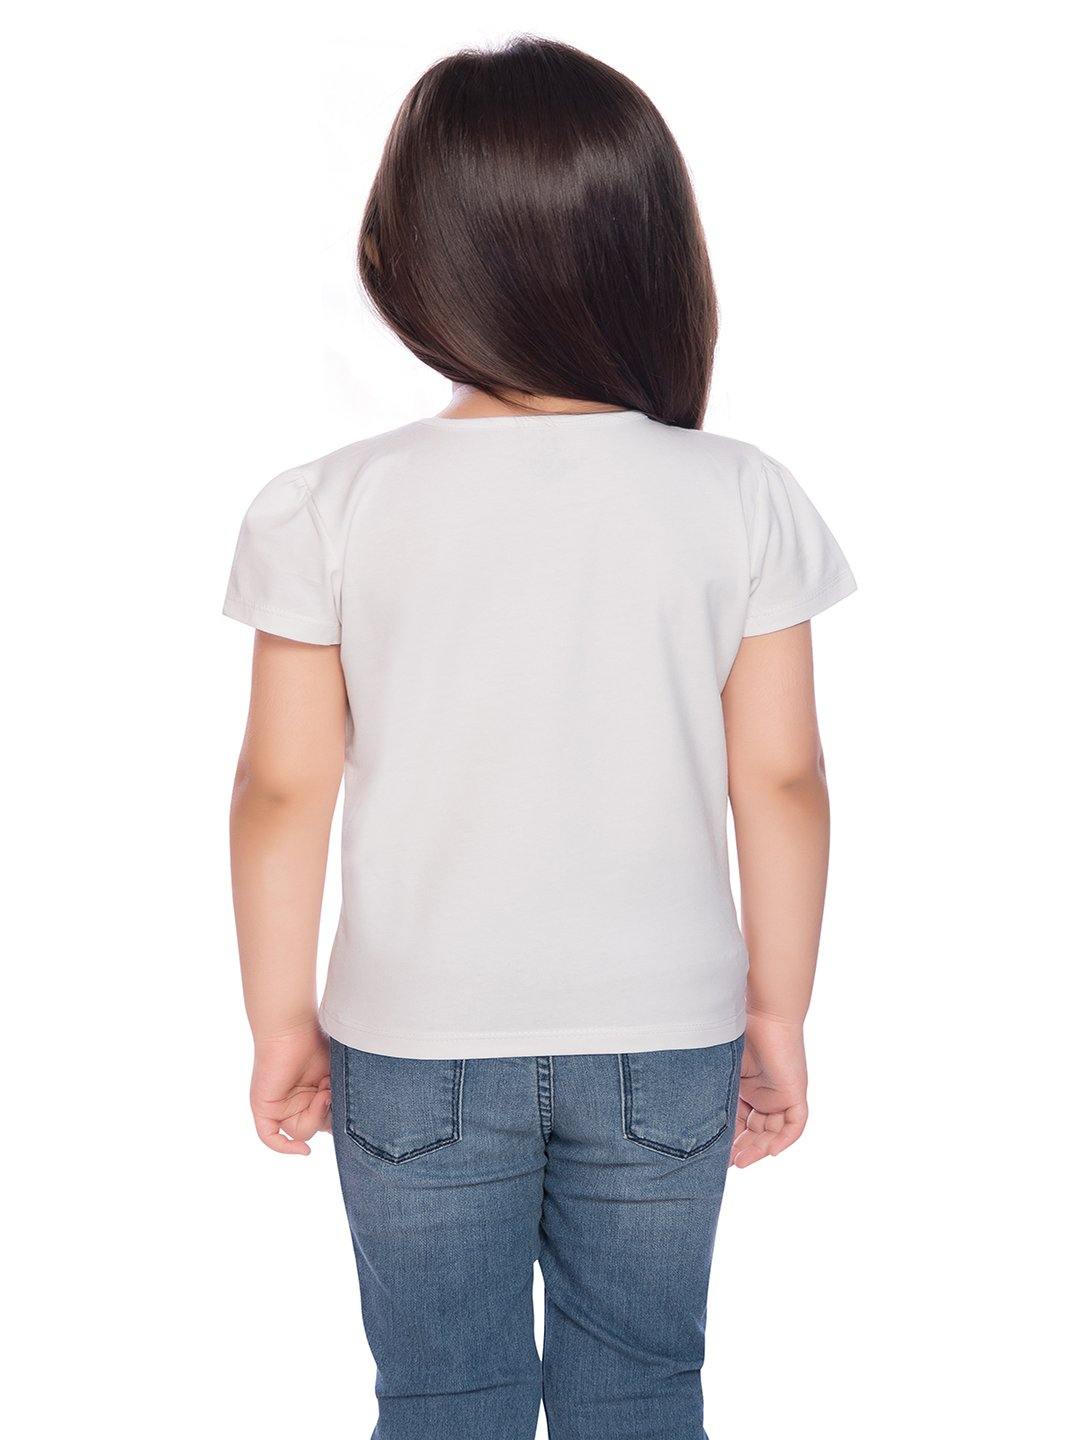 Tiny Baby White Colored Top - T-107 White - TINY BABY INDIA shop.tinybaby.in